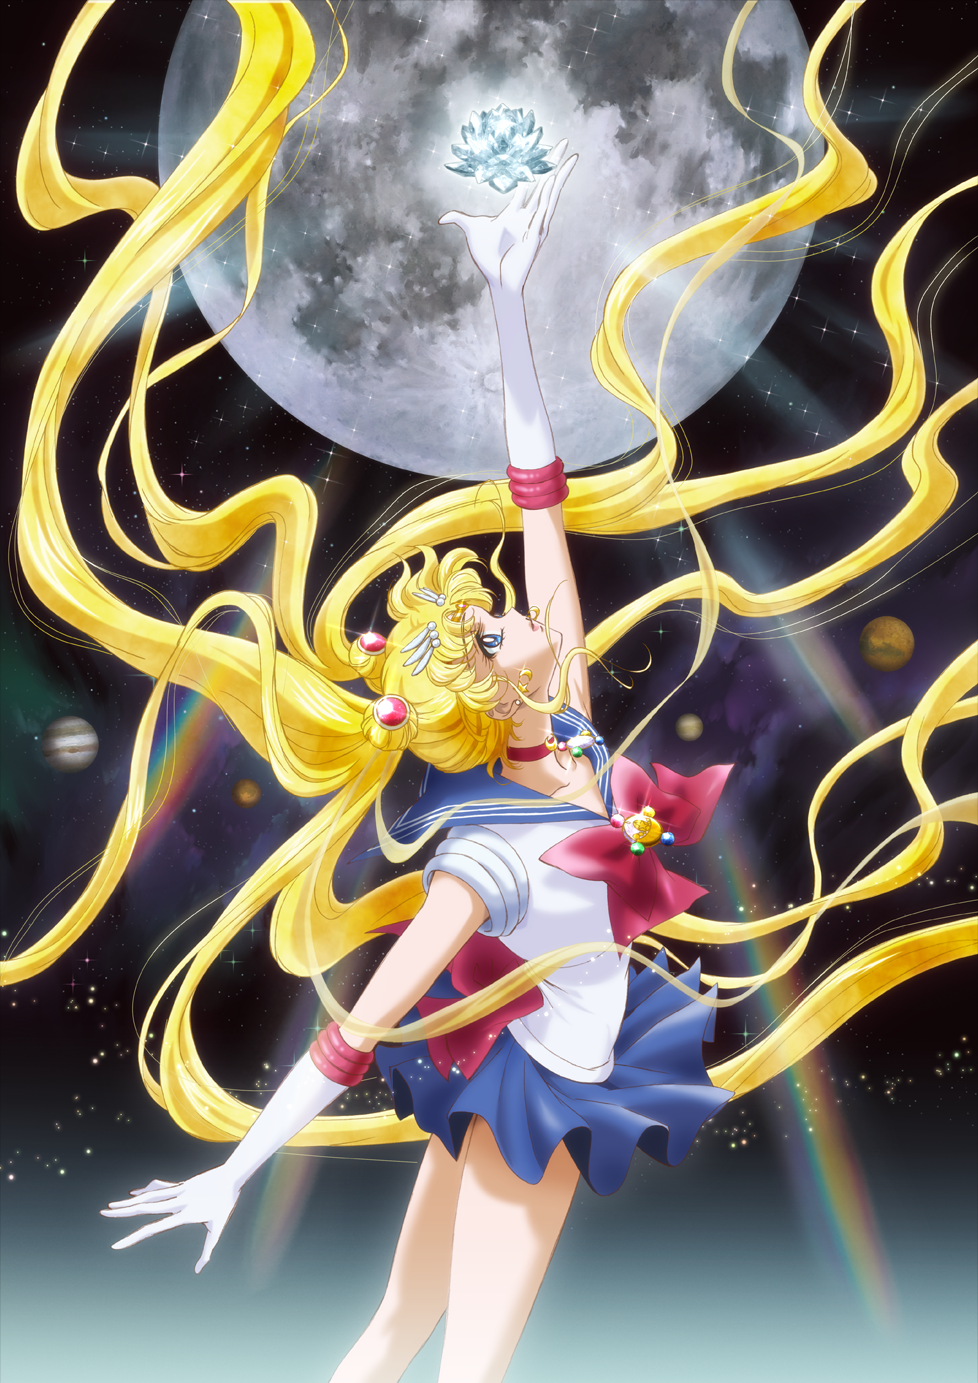 1girl arched_back bishoujo_senshi_sailor_moon bishoujo_senshi_sailor_moon_crystal blonde_hair blue_eyes bow bowtie brooch choker double_bun earrings elbow_gloves gloves hair_bun hair_ornament highres jewelry long_hair looking_up miniskirt moon official_art planet profile promotional_art raised_hand sailor_collar sailor_moon skirt solo space star star_(sky) starry_background takeuchi_naoko tsukino_usagi twintails very_long_hair white_gloves wind_lift